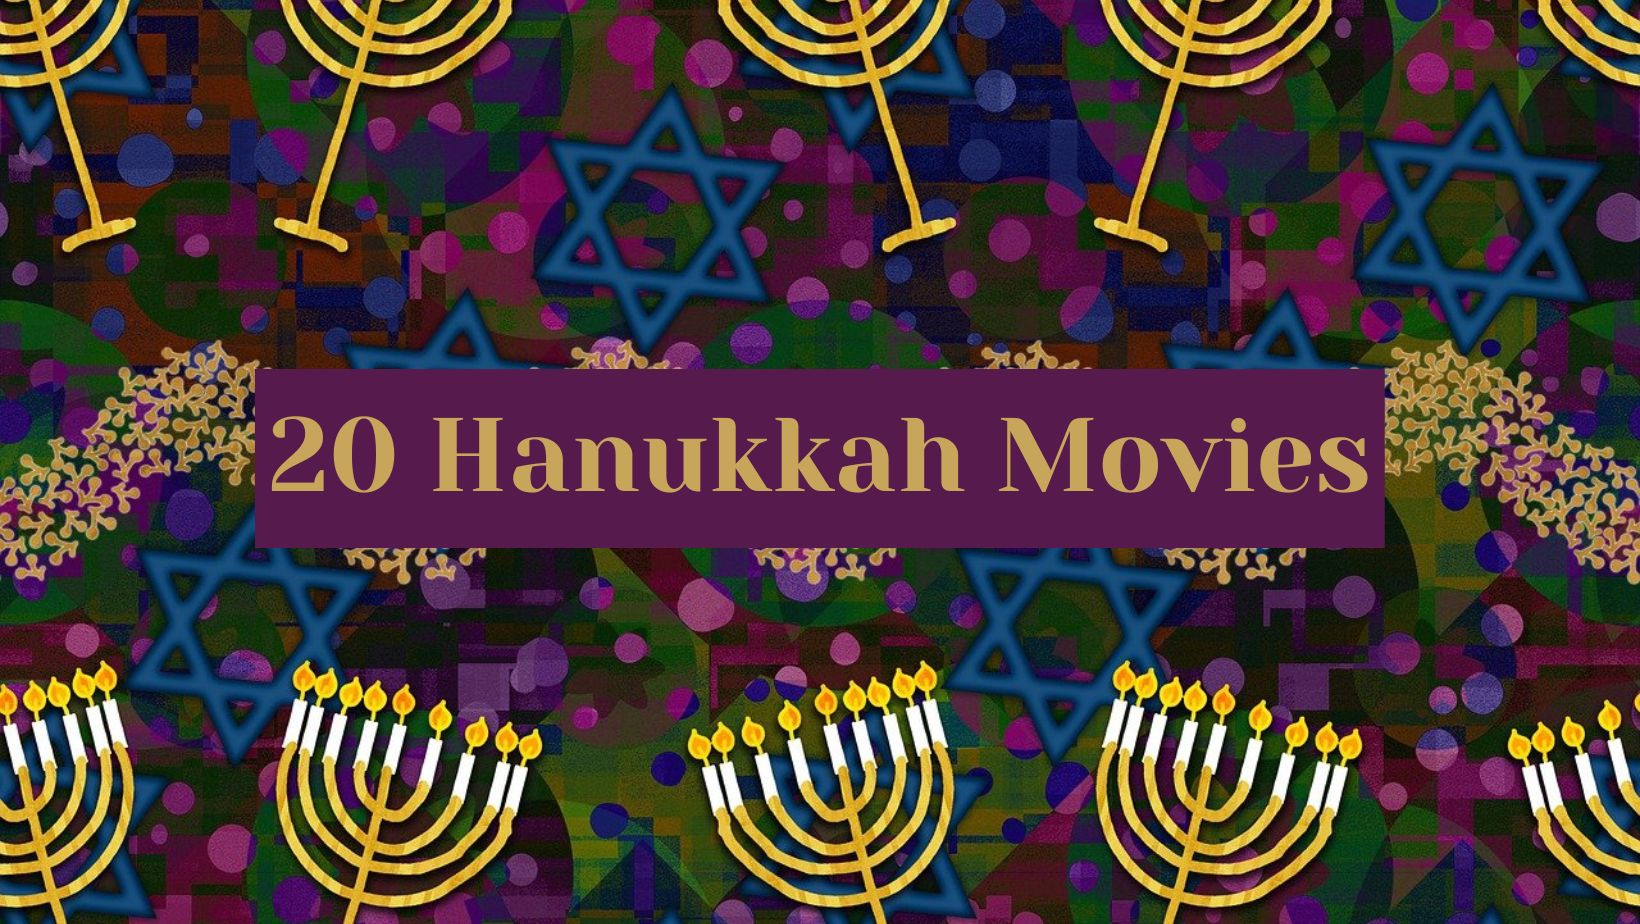 20 Hanukkah Movies to Get You in the Holiday Spirit